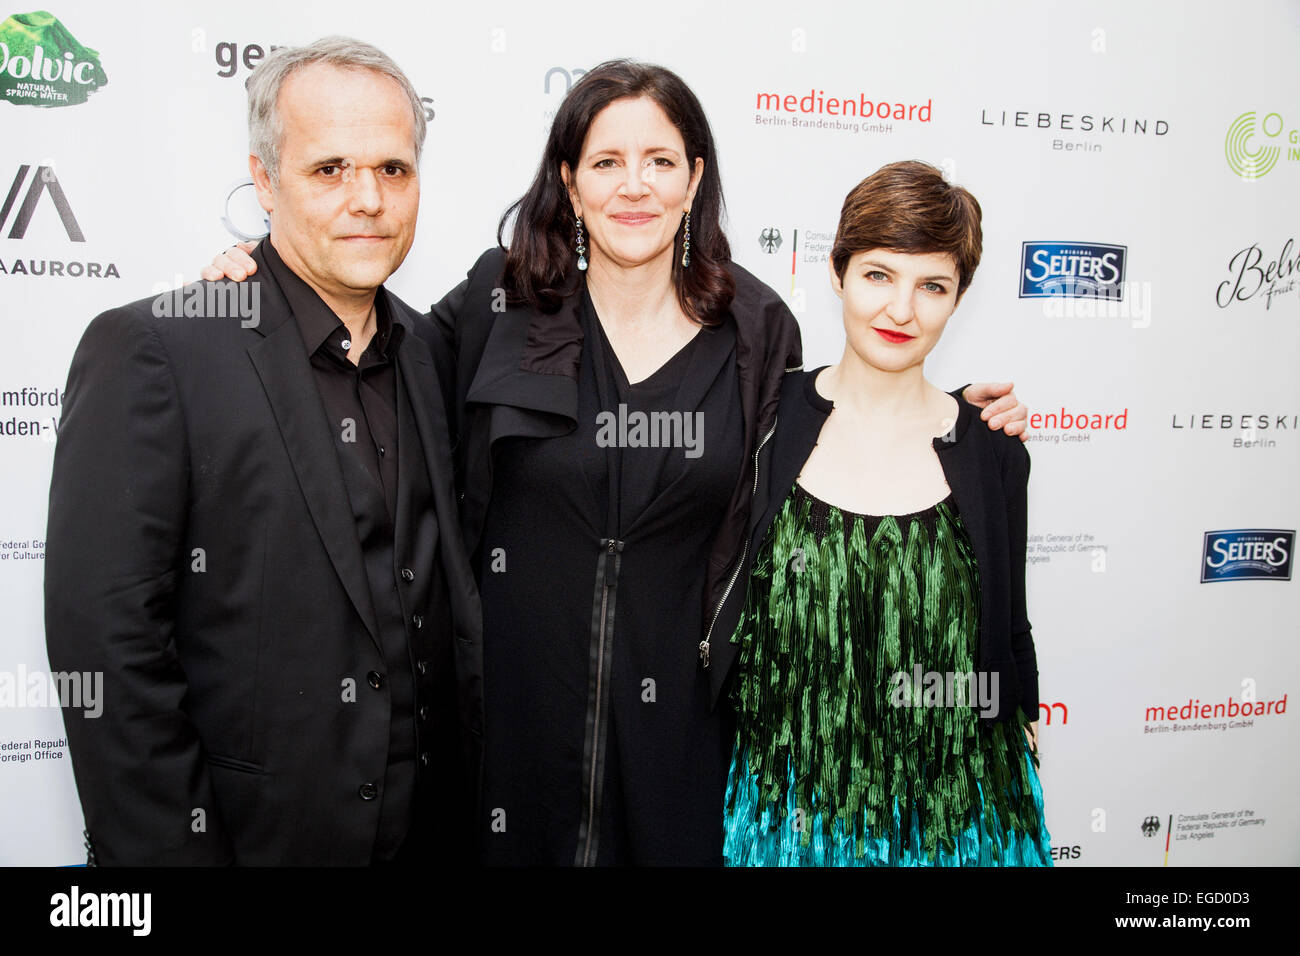 Dirk Wilutzky, Laura Poitras and Mathilde Bonnefoy at the German Films and the Consulate General of the Federal Republic Of Germany's German Oscar nominees reception held at Villa Aurora in Pacific Palisades on February 21, 2015. Credit: Flaminia Fanale/Lumeimages.com Stock Photo